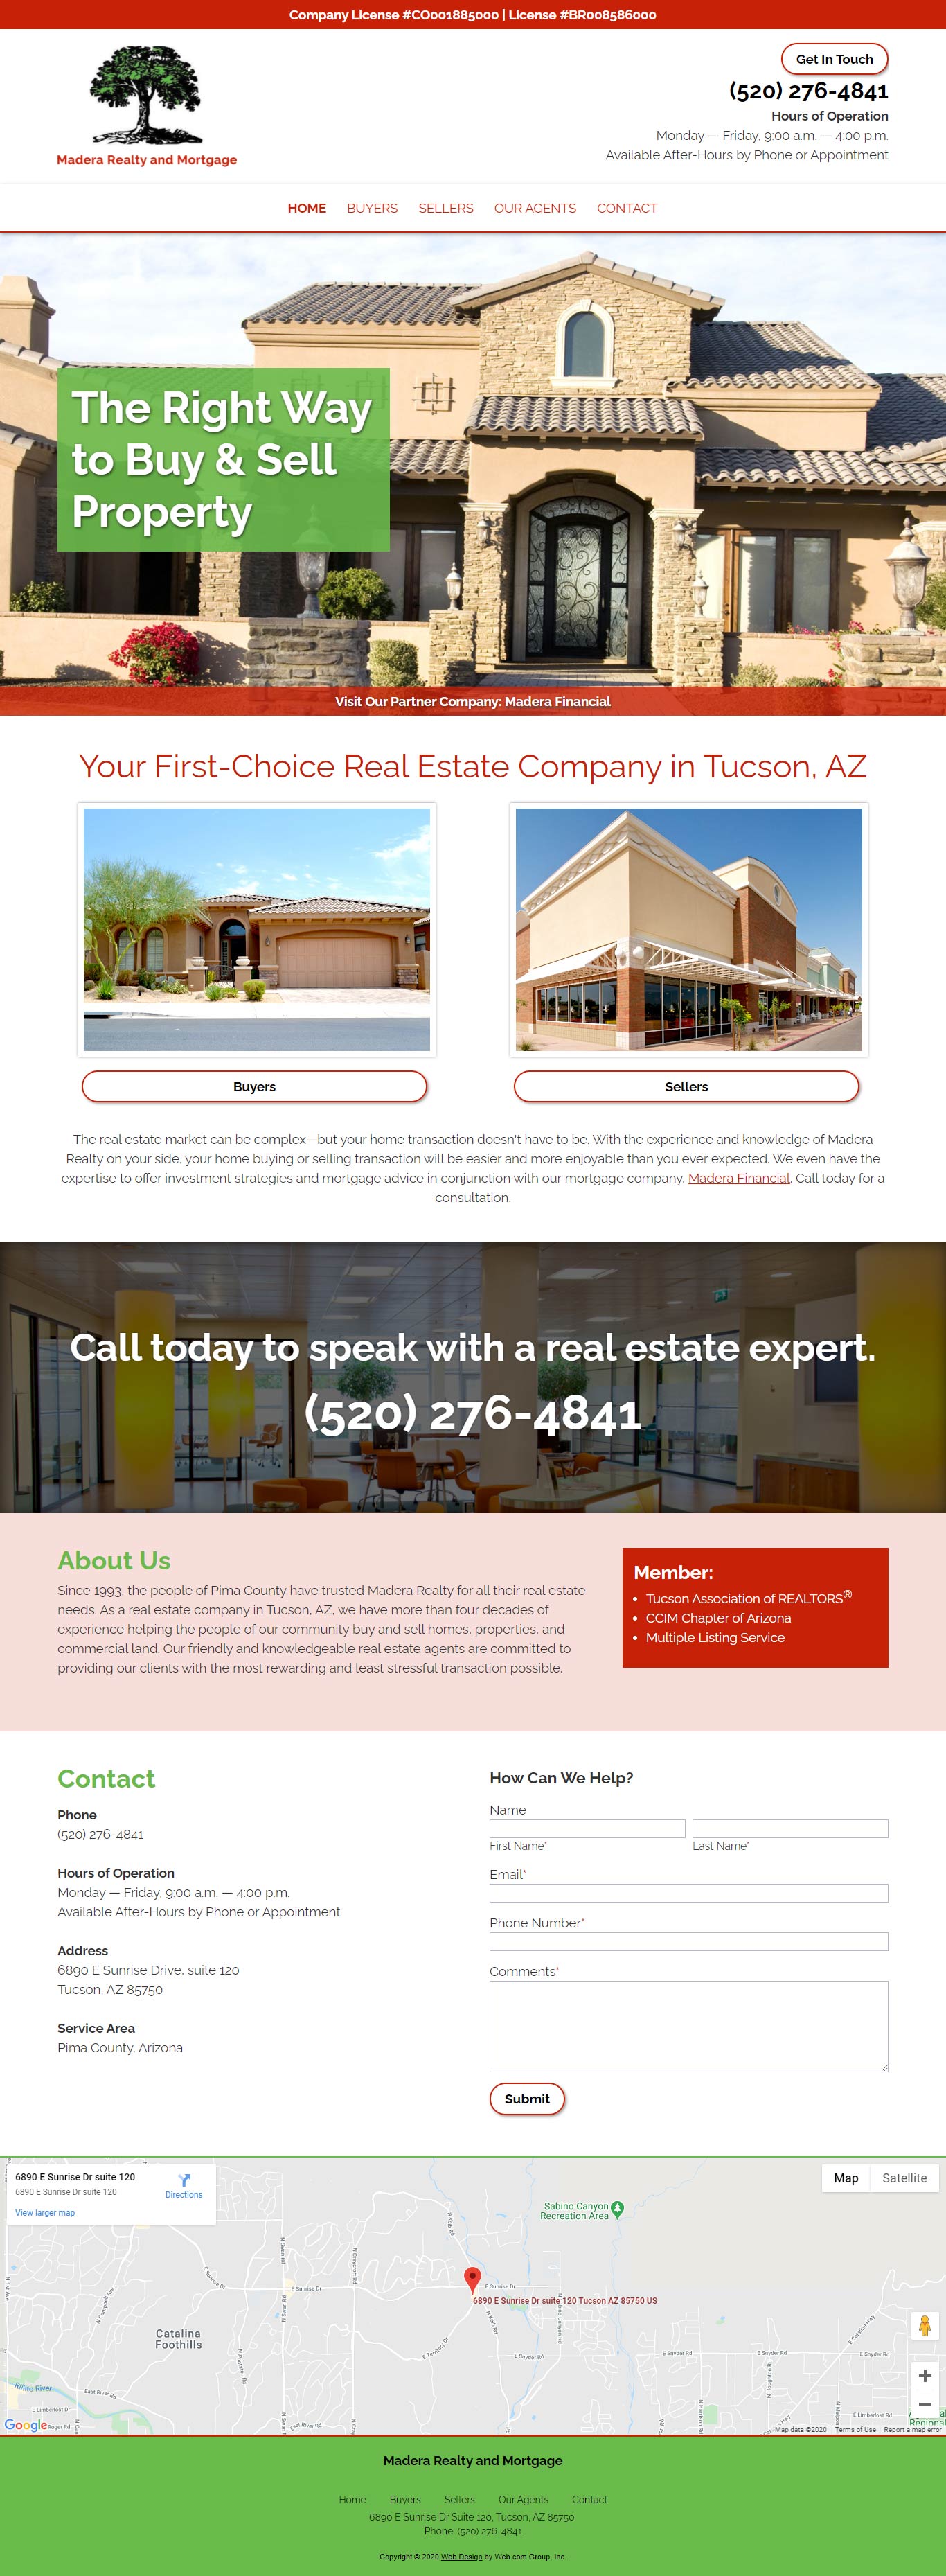 Madera Realty and Mortgage Website